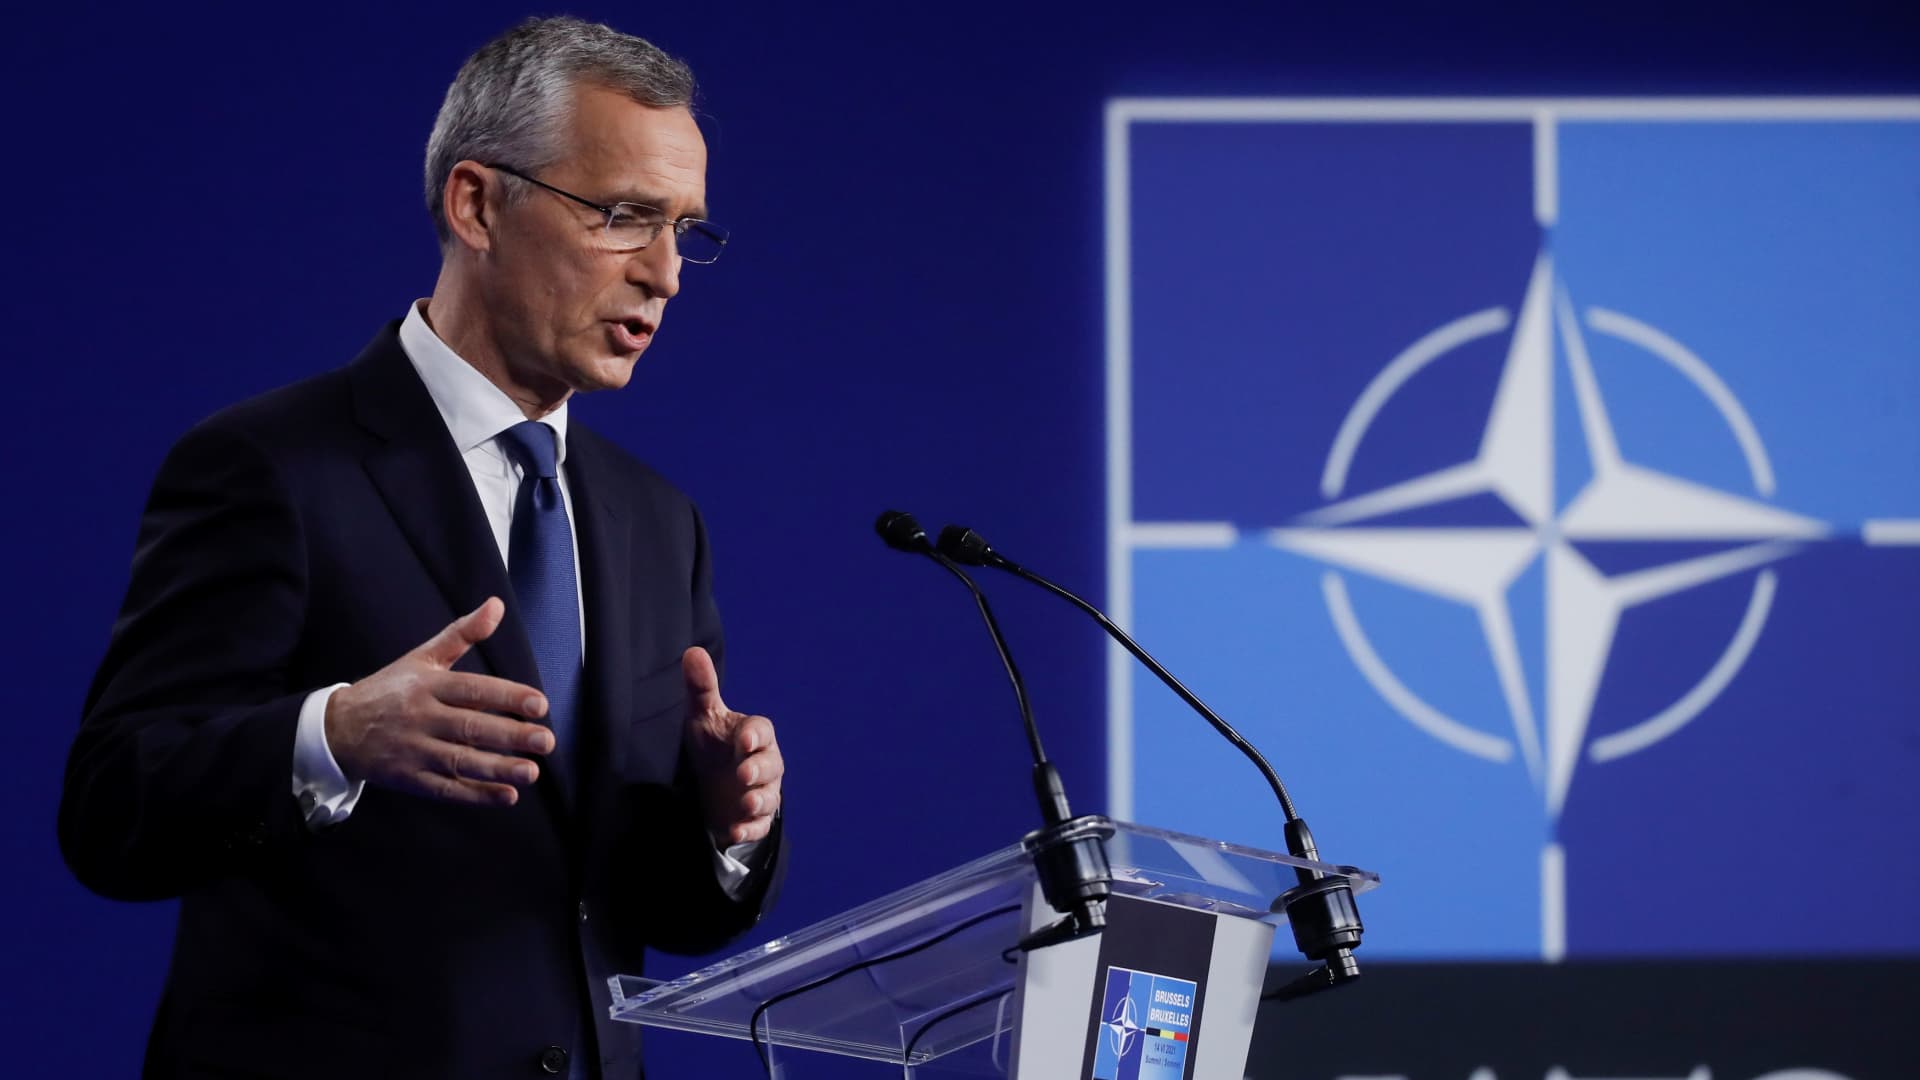 NATO Secretary General Jens Stoltenberg holds a news conference during a NATO summit at the Alliance's headquarters, in Brussels, Belgium, June 14, 2021.